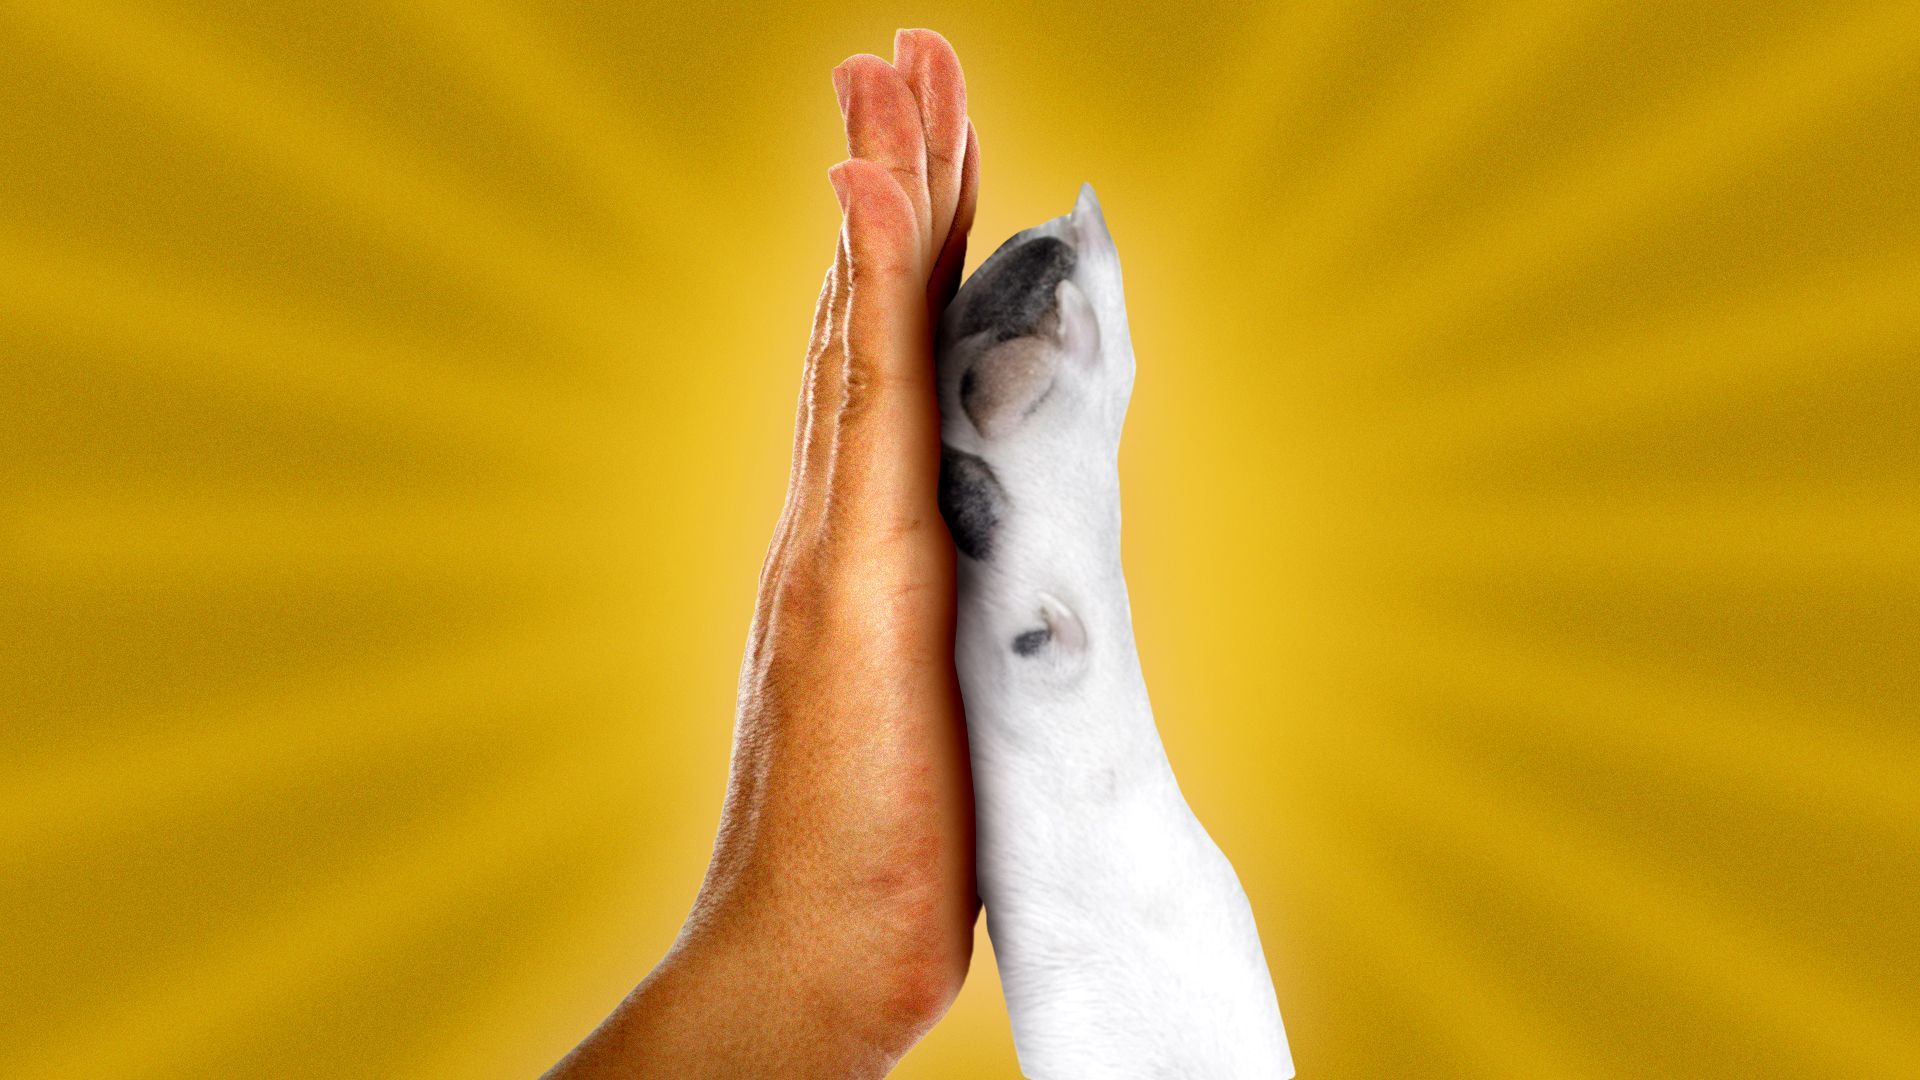 Illustration of a human hand and dog paw high fiving